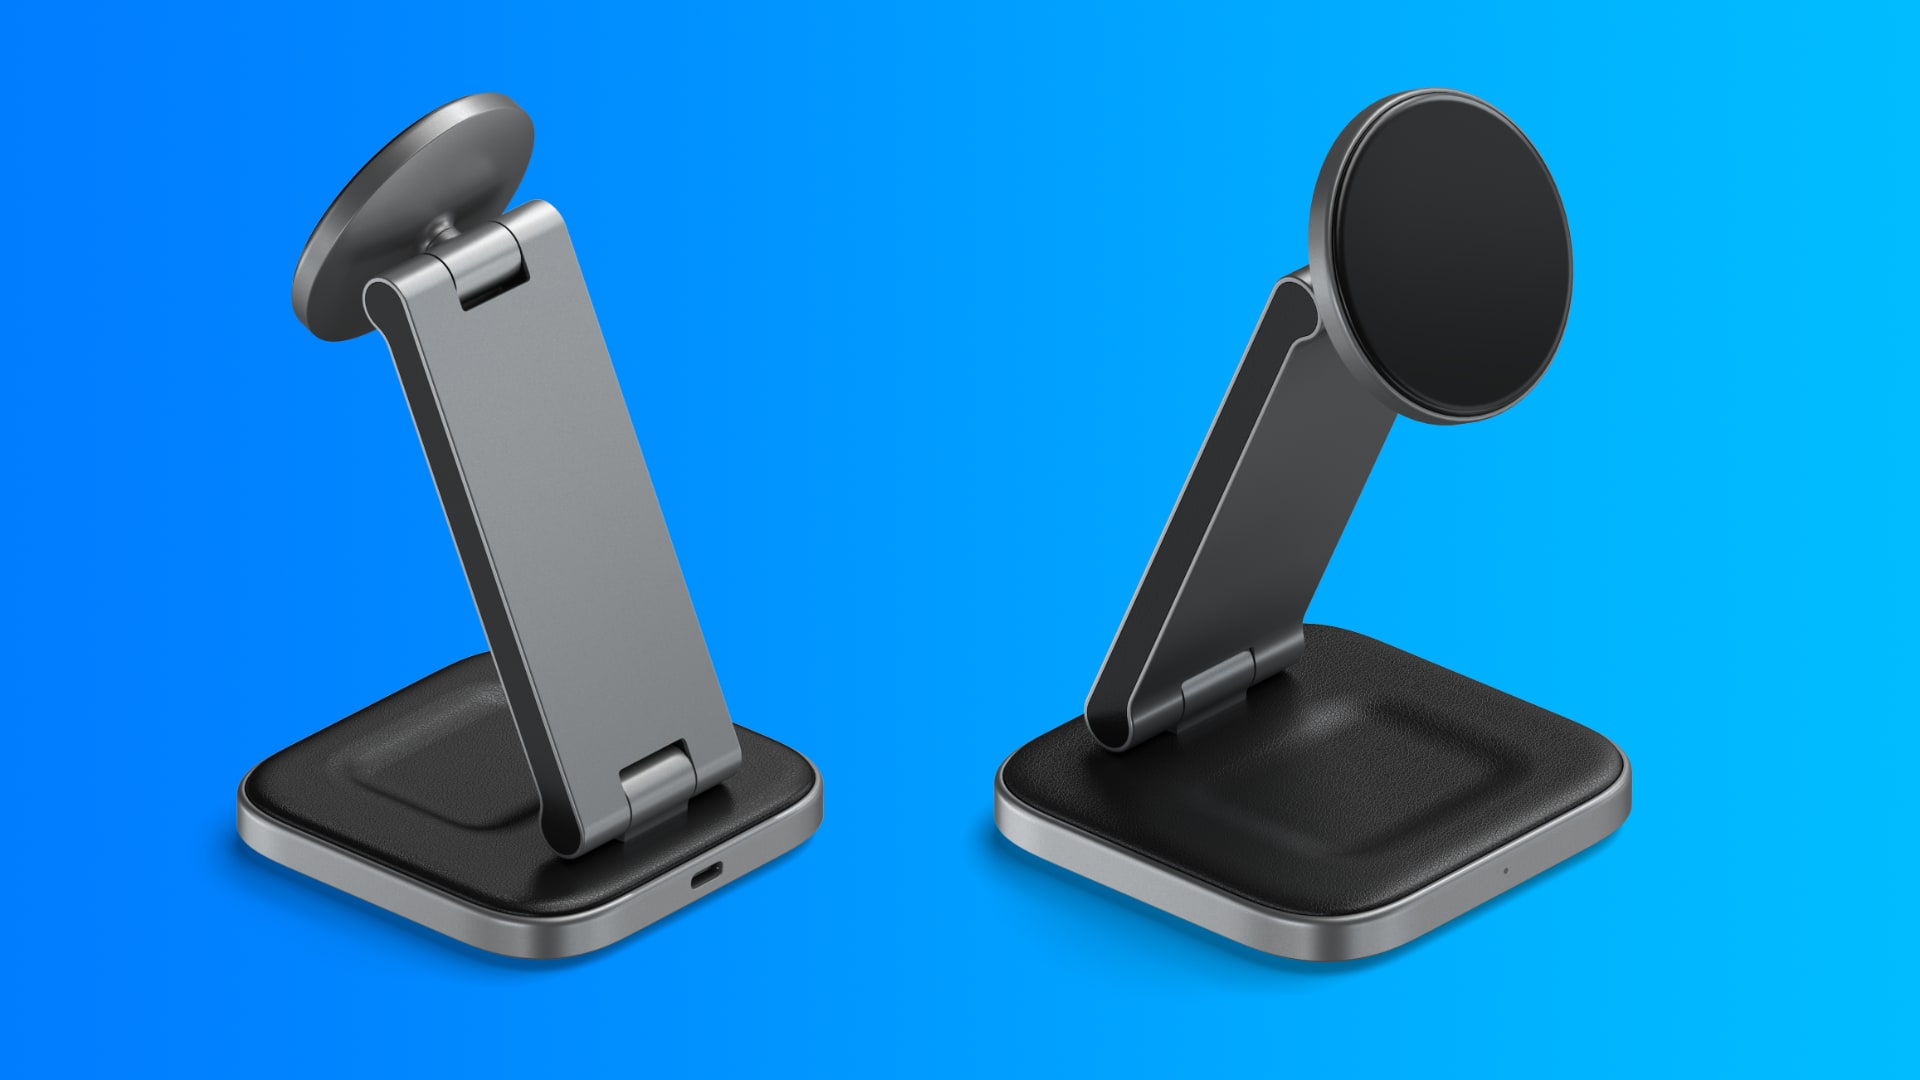 The front and back of Satechi's 2-in-1 charging stand